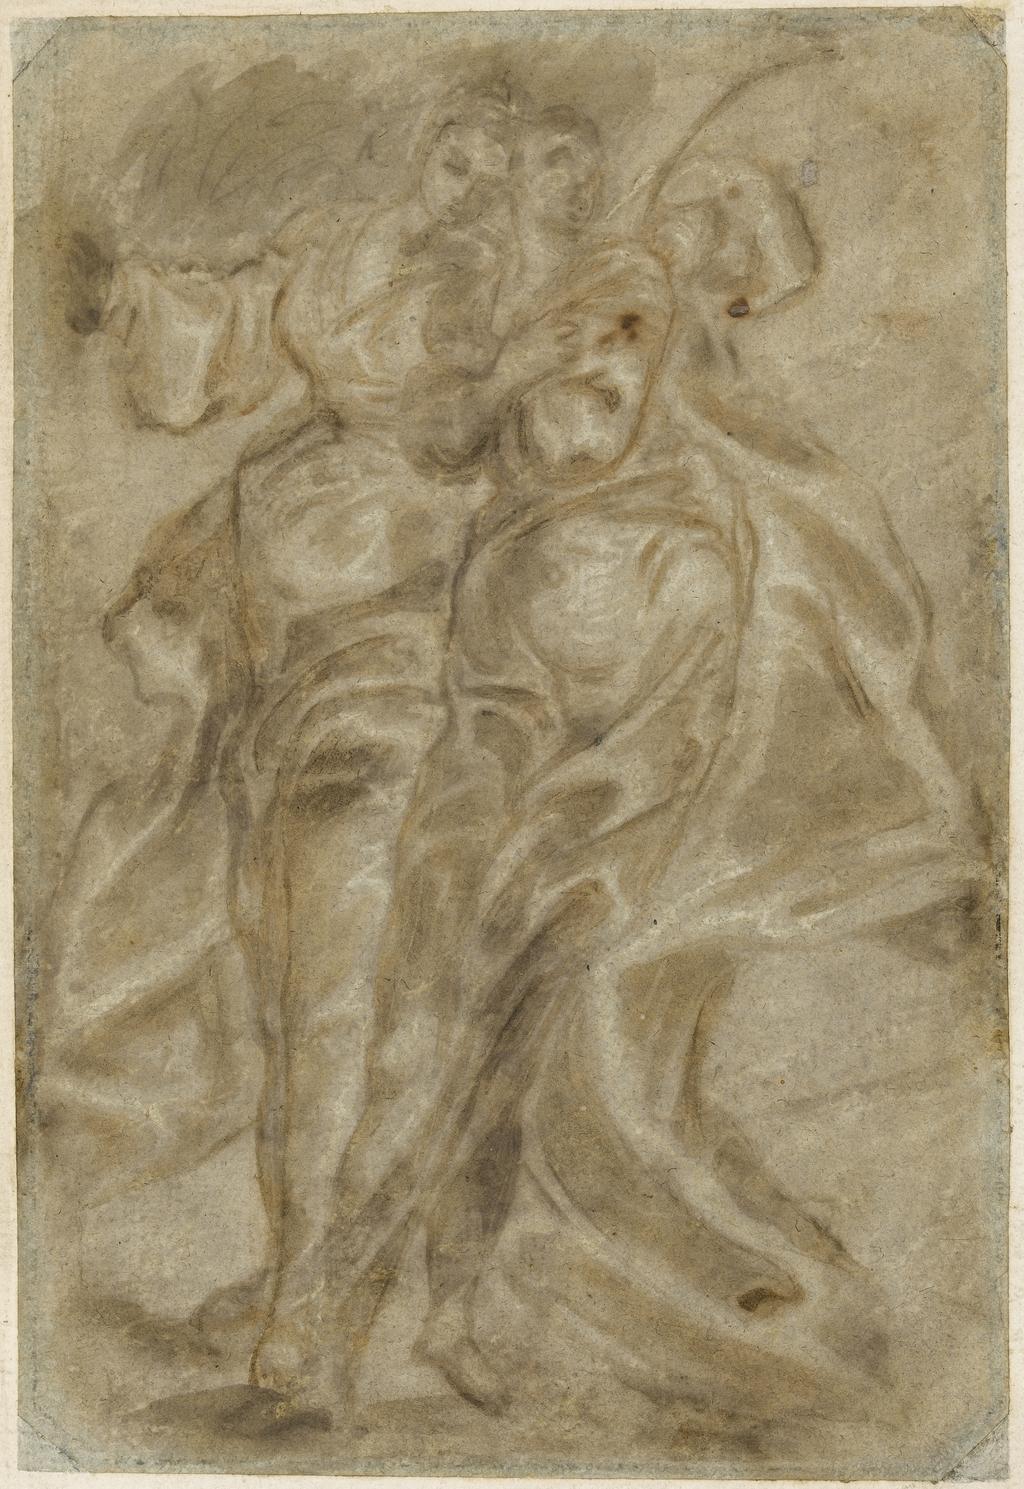 An image of Title/s: A study of two draped female figures Maker/s: THEOTOKOPOULOS, Domenico, called EL GRECO, attributed to Candia [now Herakleion], Crete c.1541-1614 ToledoTechnique Description: brush in brown and grey, heightened with bodycolour on faded blue-grey paper Dimensions: height: 260 mm, width: 176 mm